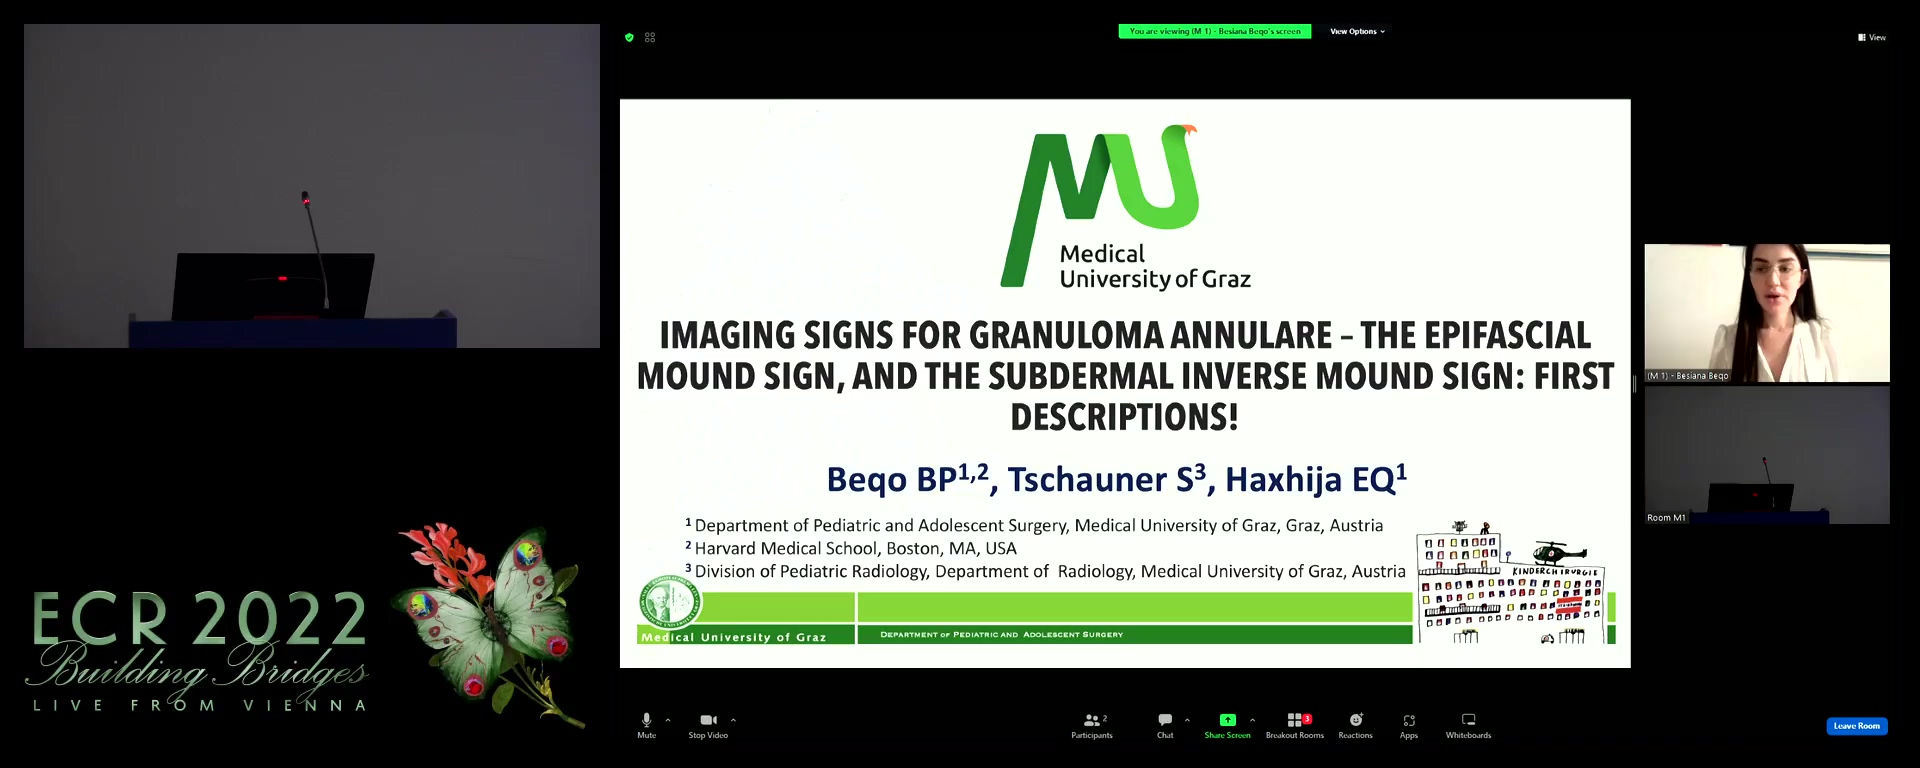 Imaging signs for granuloma annulare by epifascial mound sign, and subdermal inverse mound sign: first descriptions - Besiana Beqo, Graz / AT